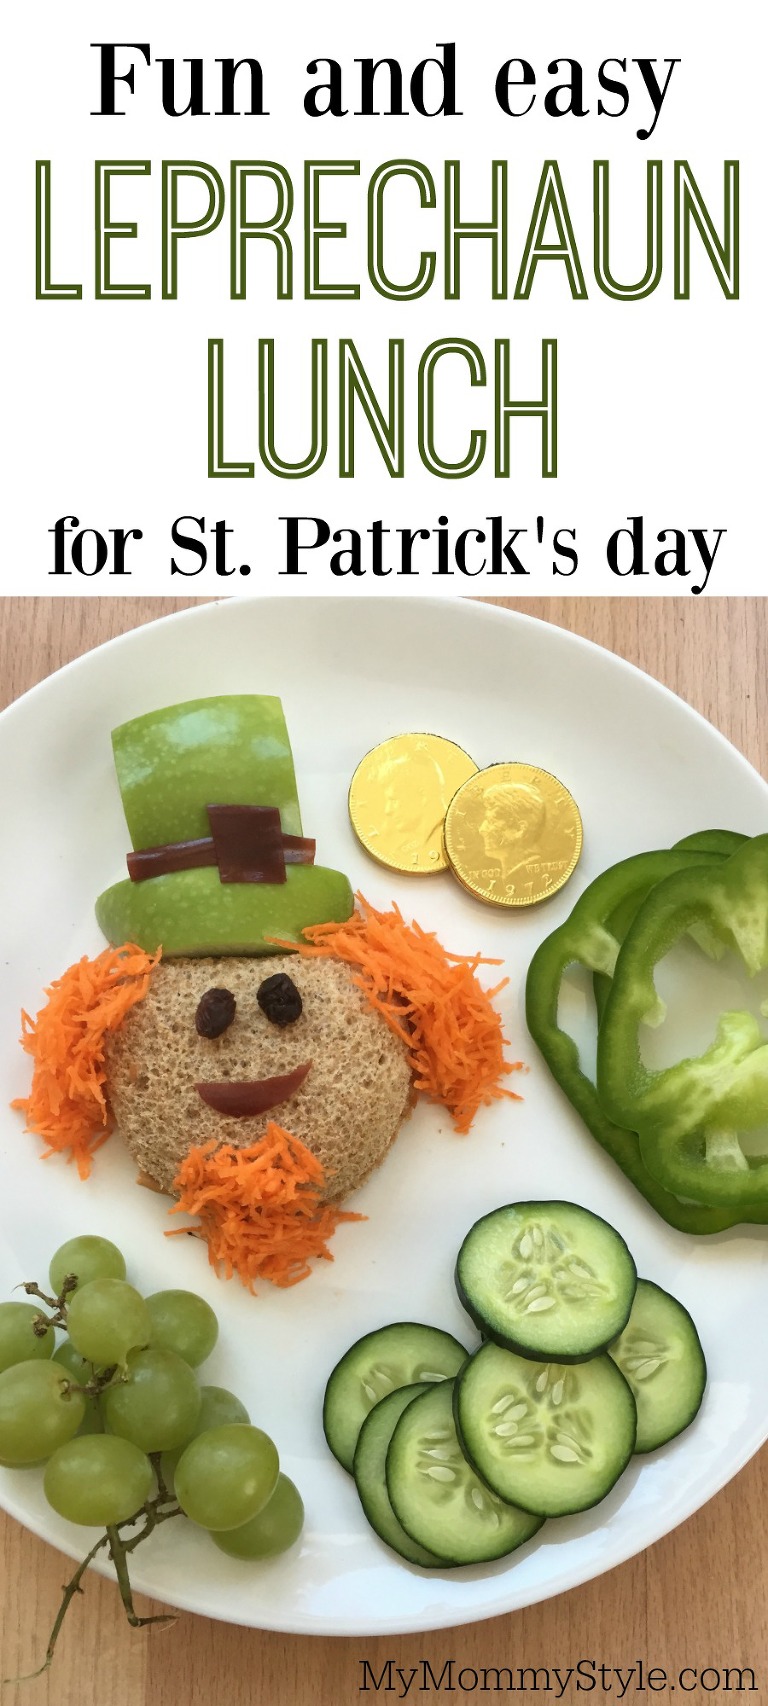 fun and easy leprechaun lunch for St. Patrick's day